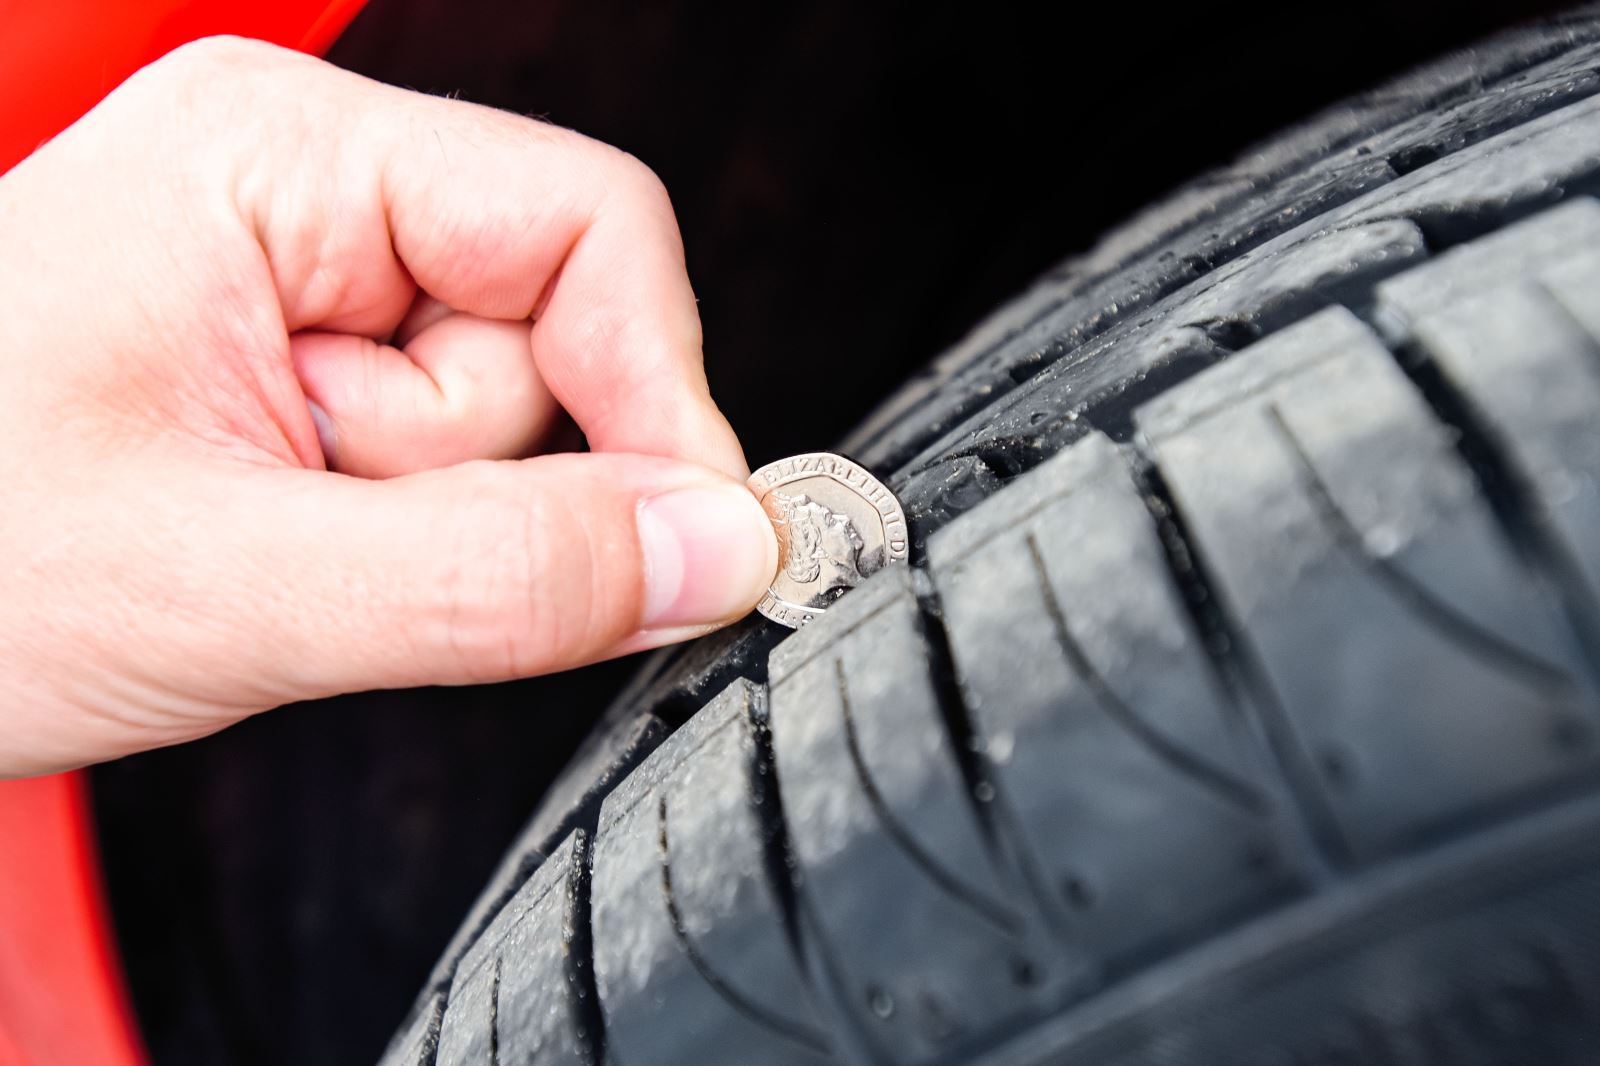 Check the quality of your tyres regularly